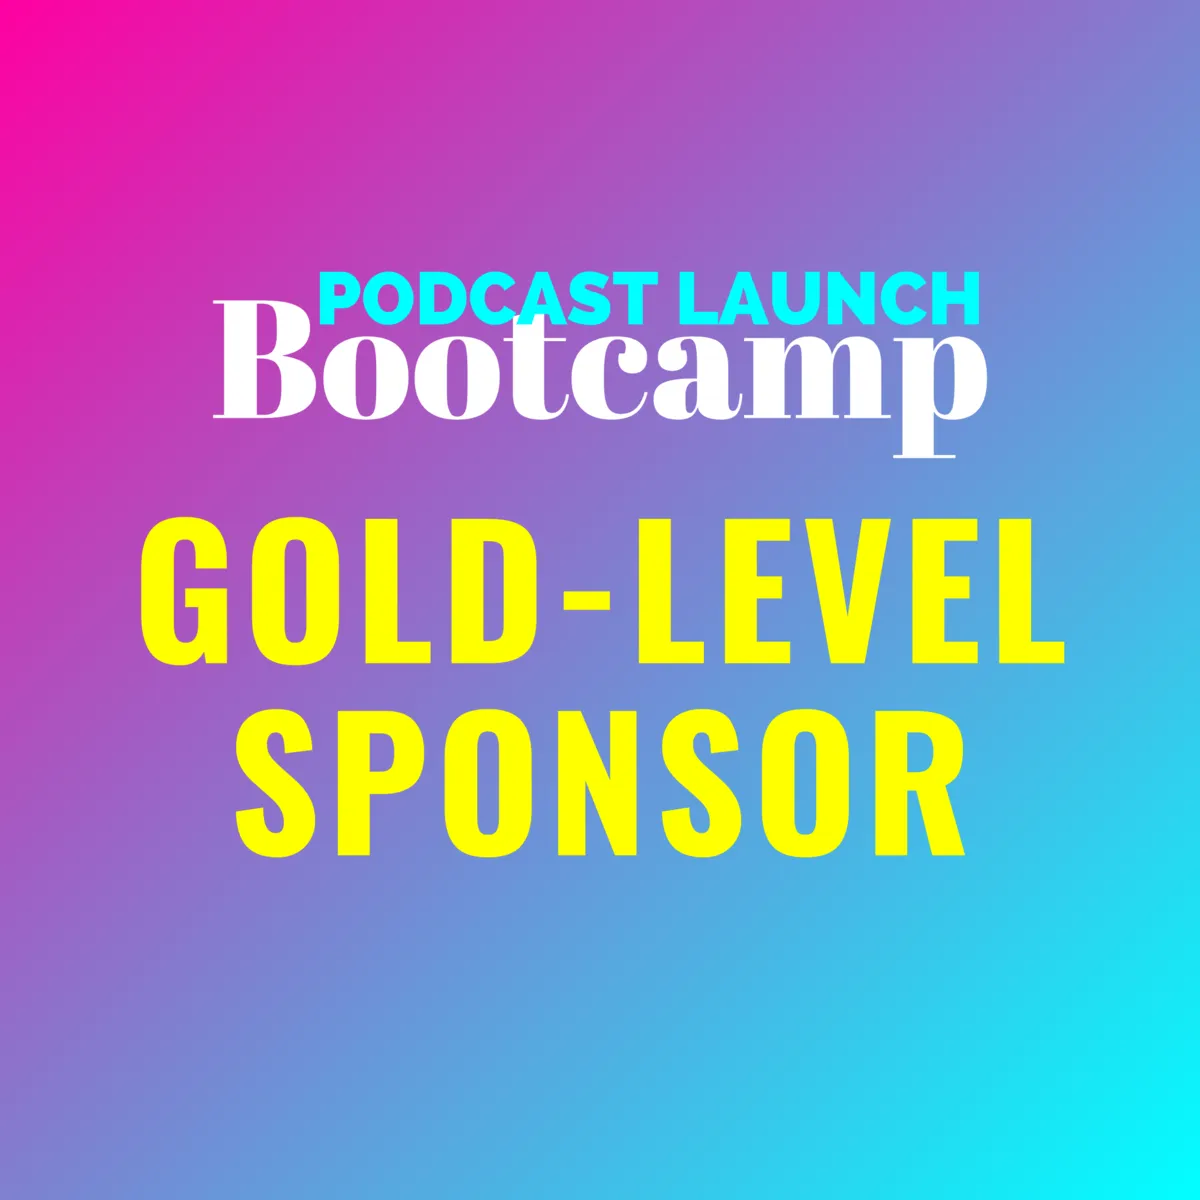 Gold-Level Sponsor: Podcast Launch Bootcamp